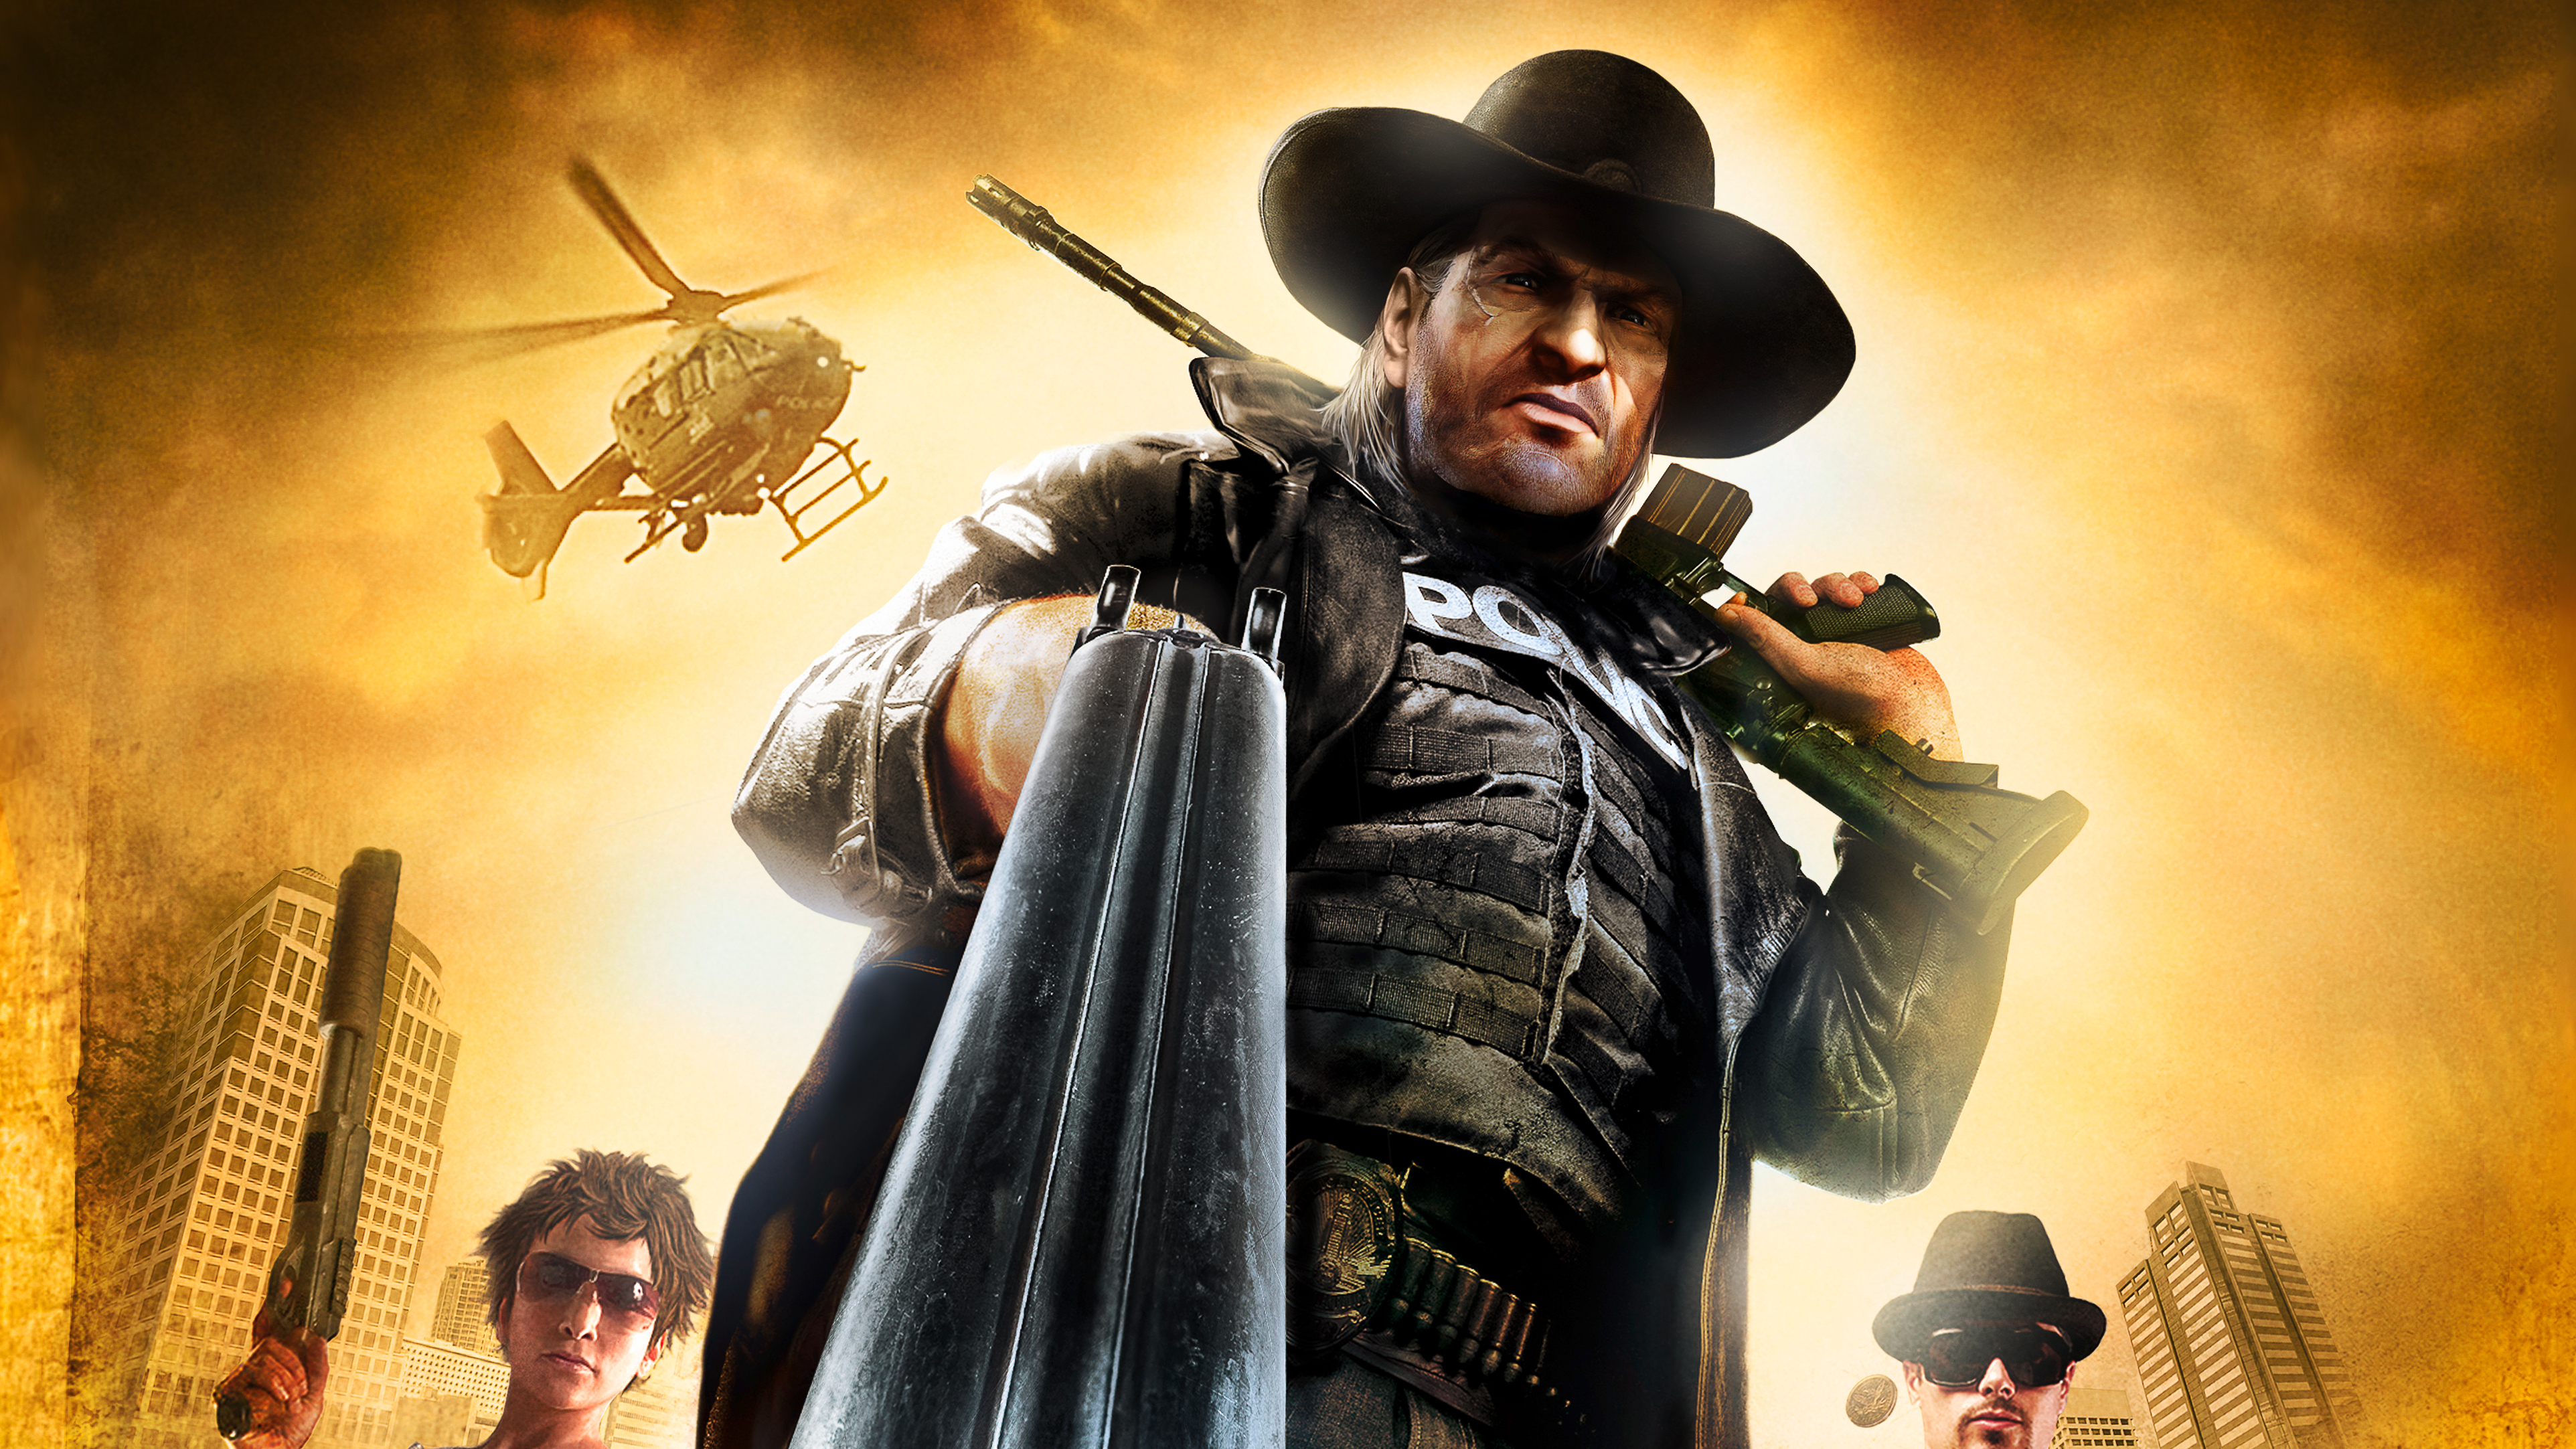 Video Game Call Of Juarez: The Cartel HD Wallpaper | Background Image